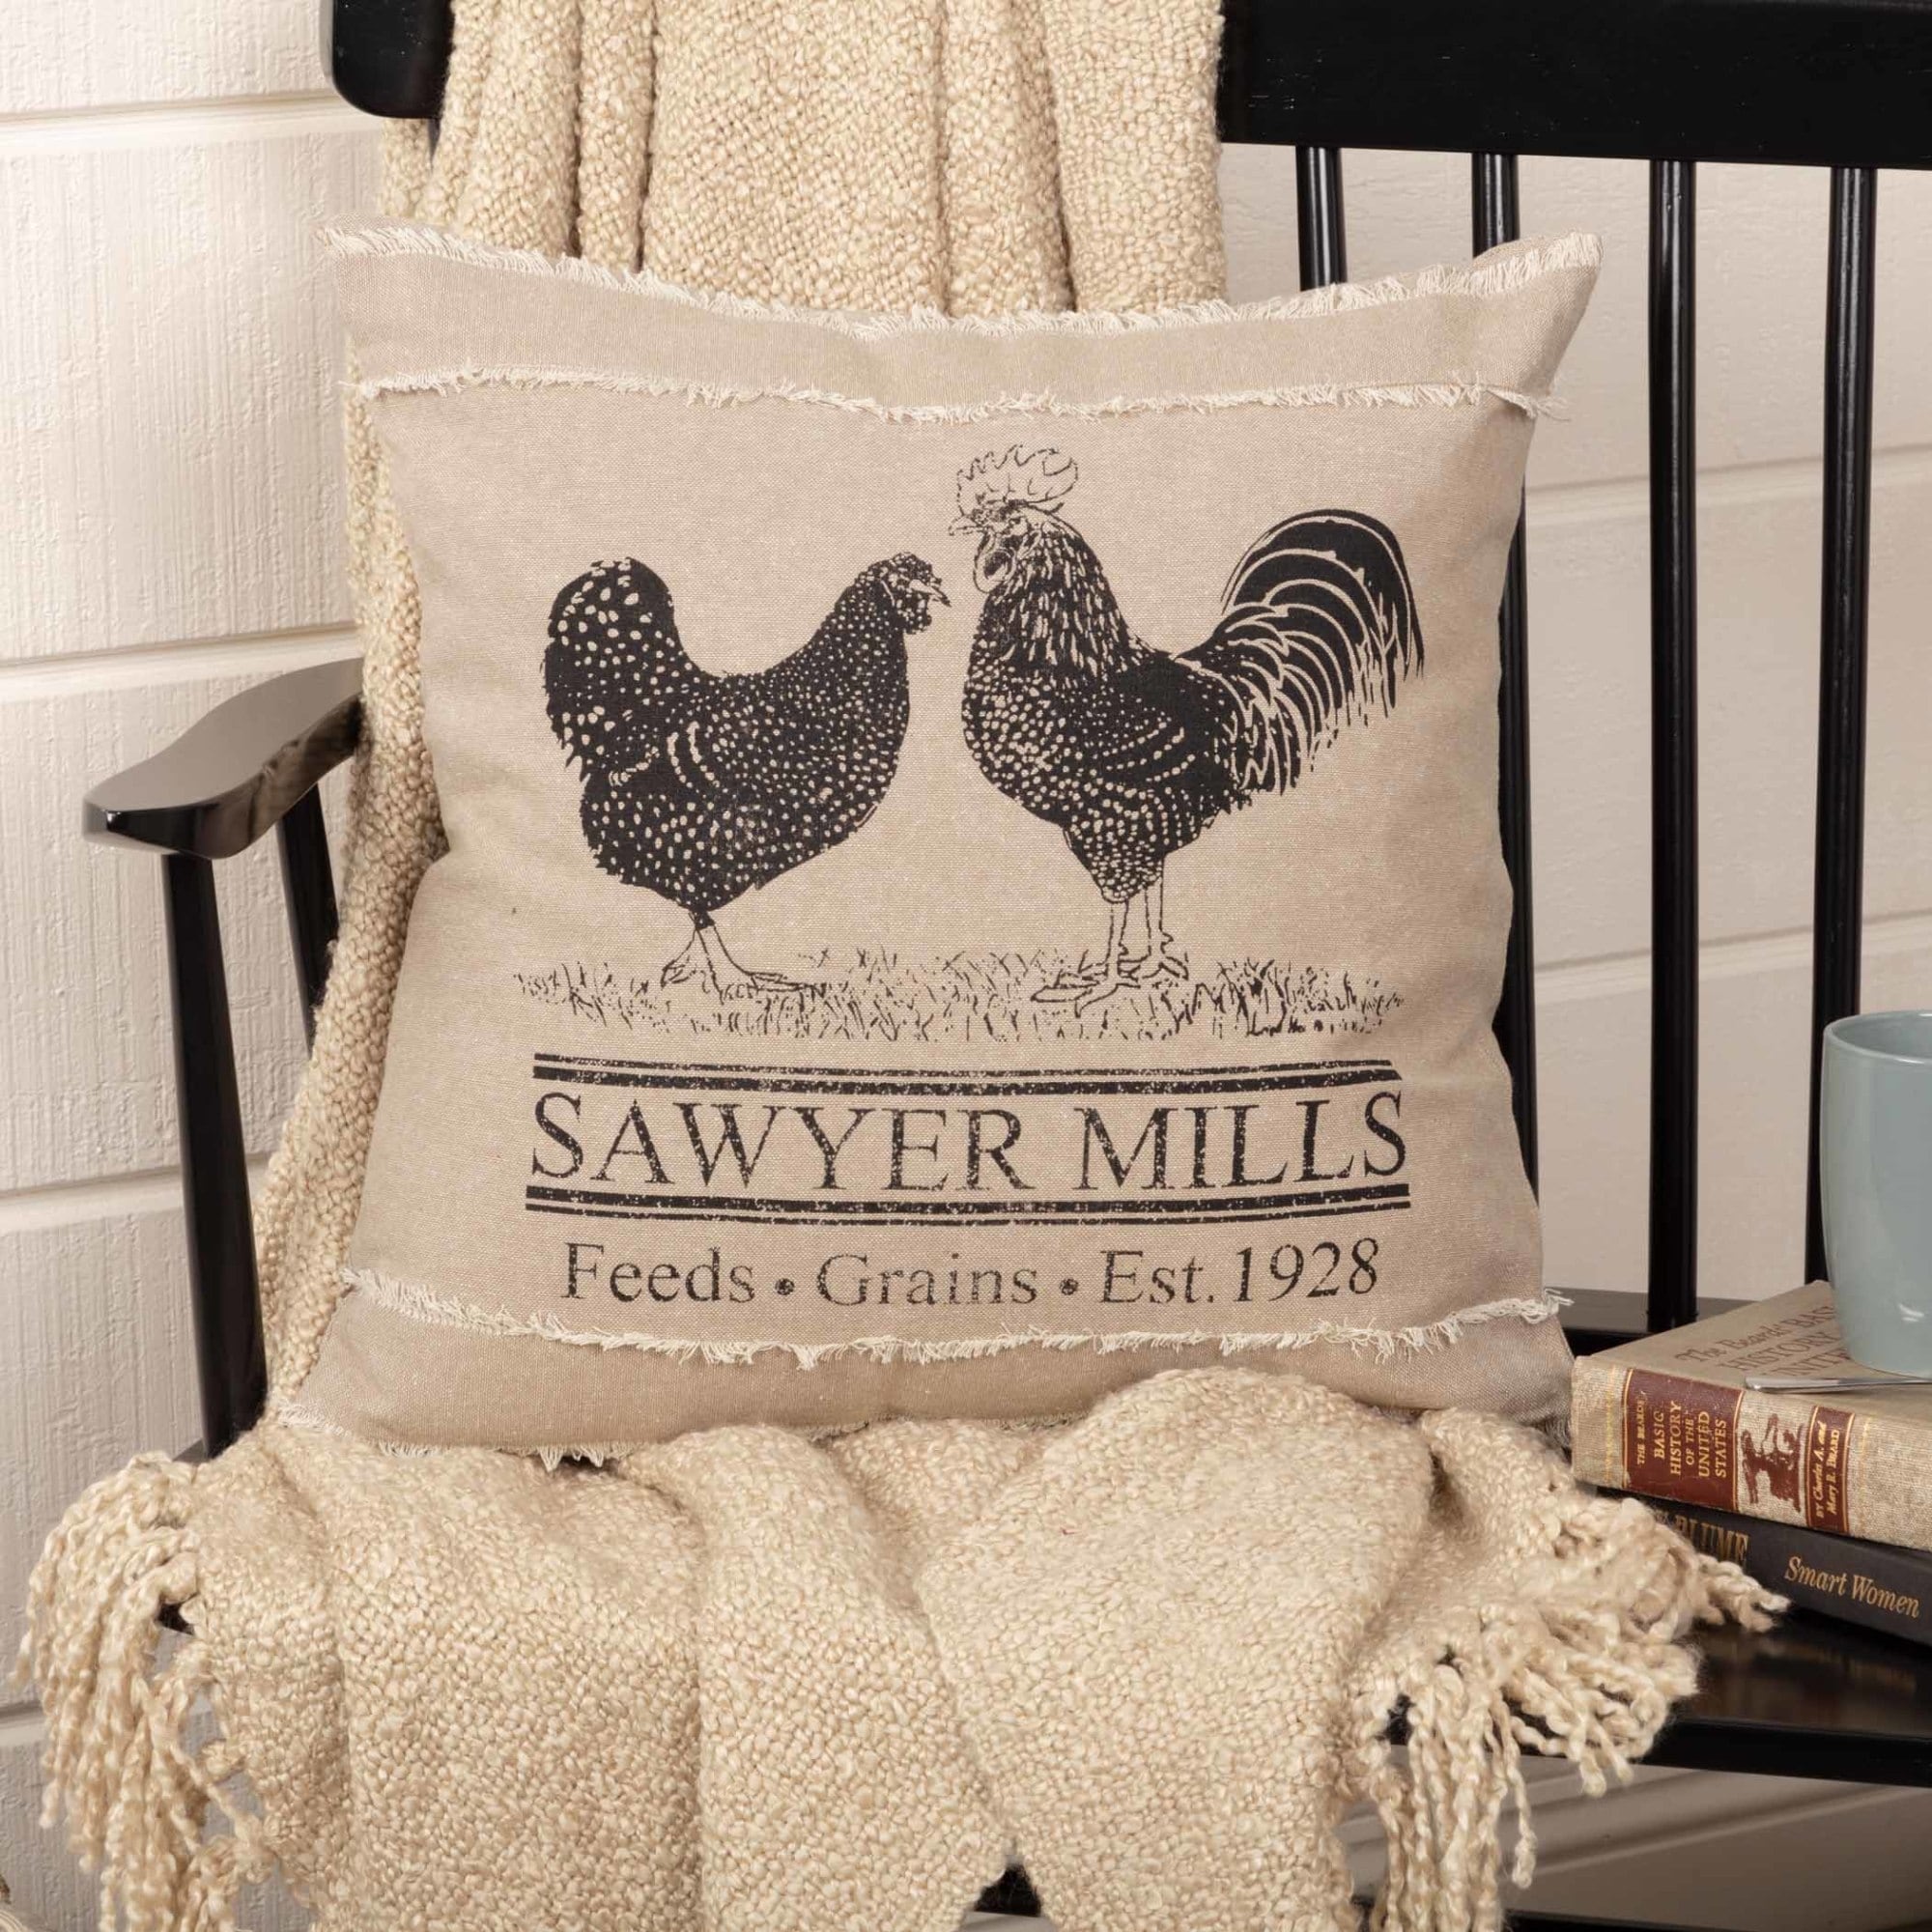 https://ak1.ostkcdn.com/images/products/is/images/direct/84273bbe3ebb164652cbdb8c65fd21e0ecd725c4/Sawyer-Mill-Charcoal-Poultry-Pillow-18x18.jpg